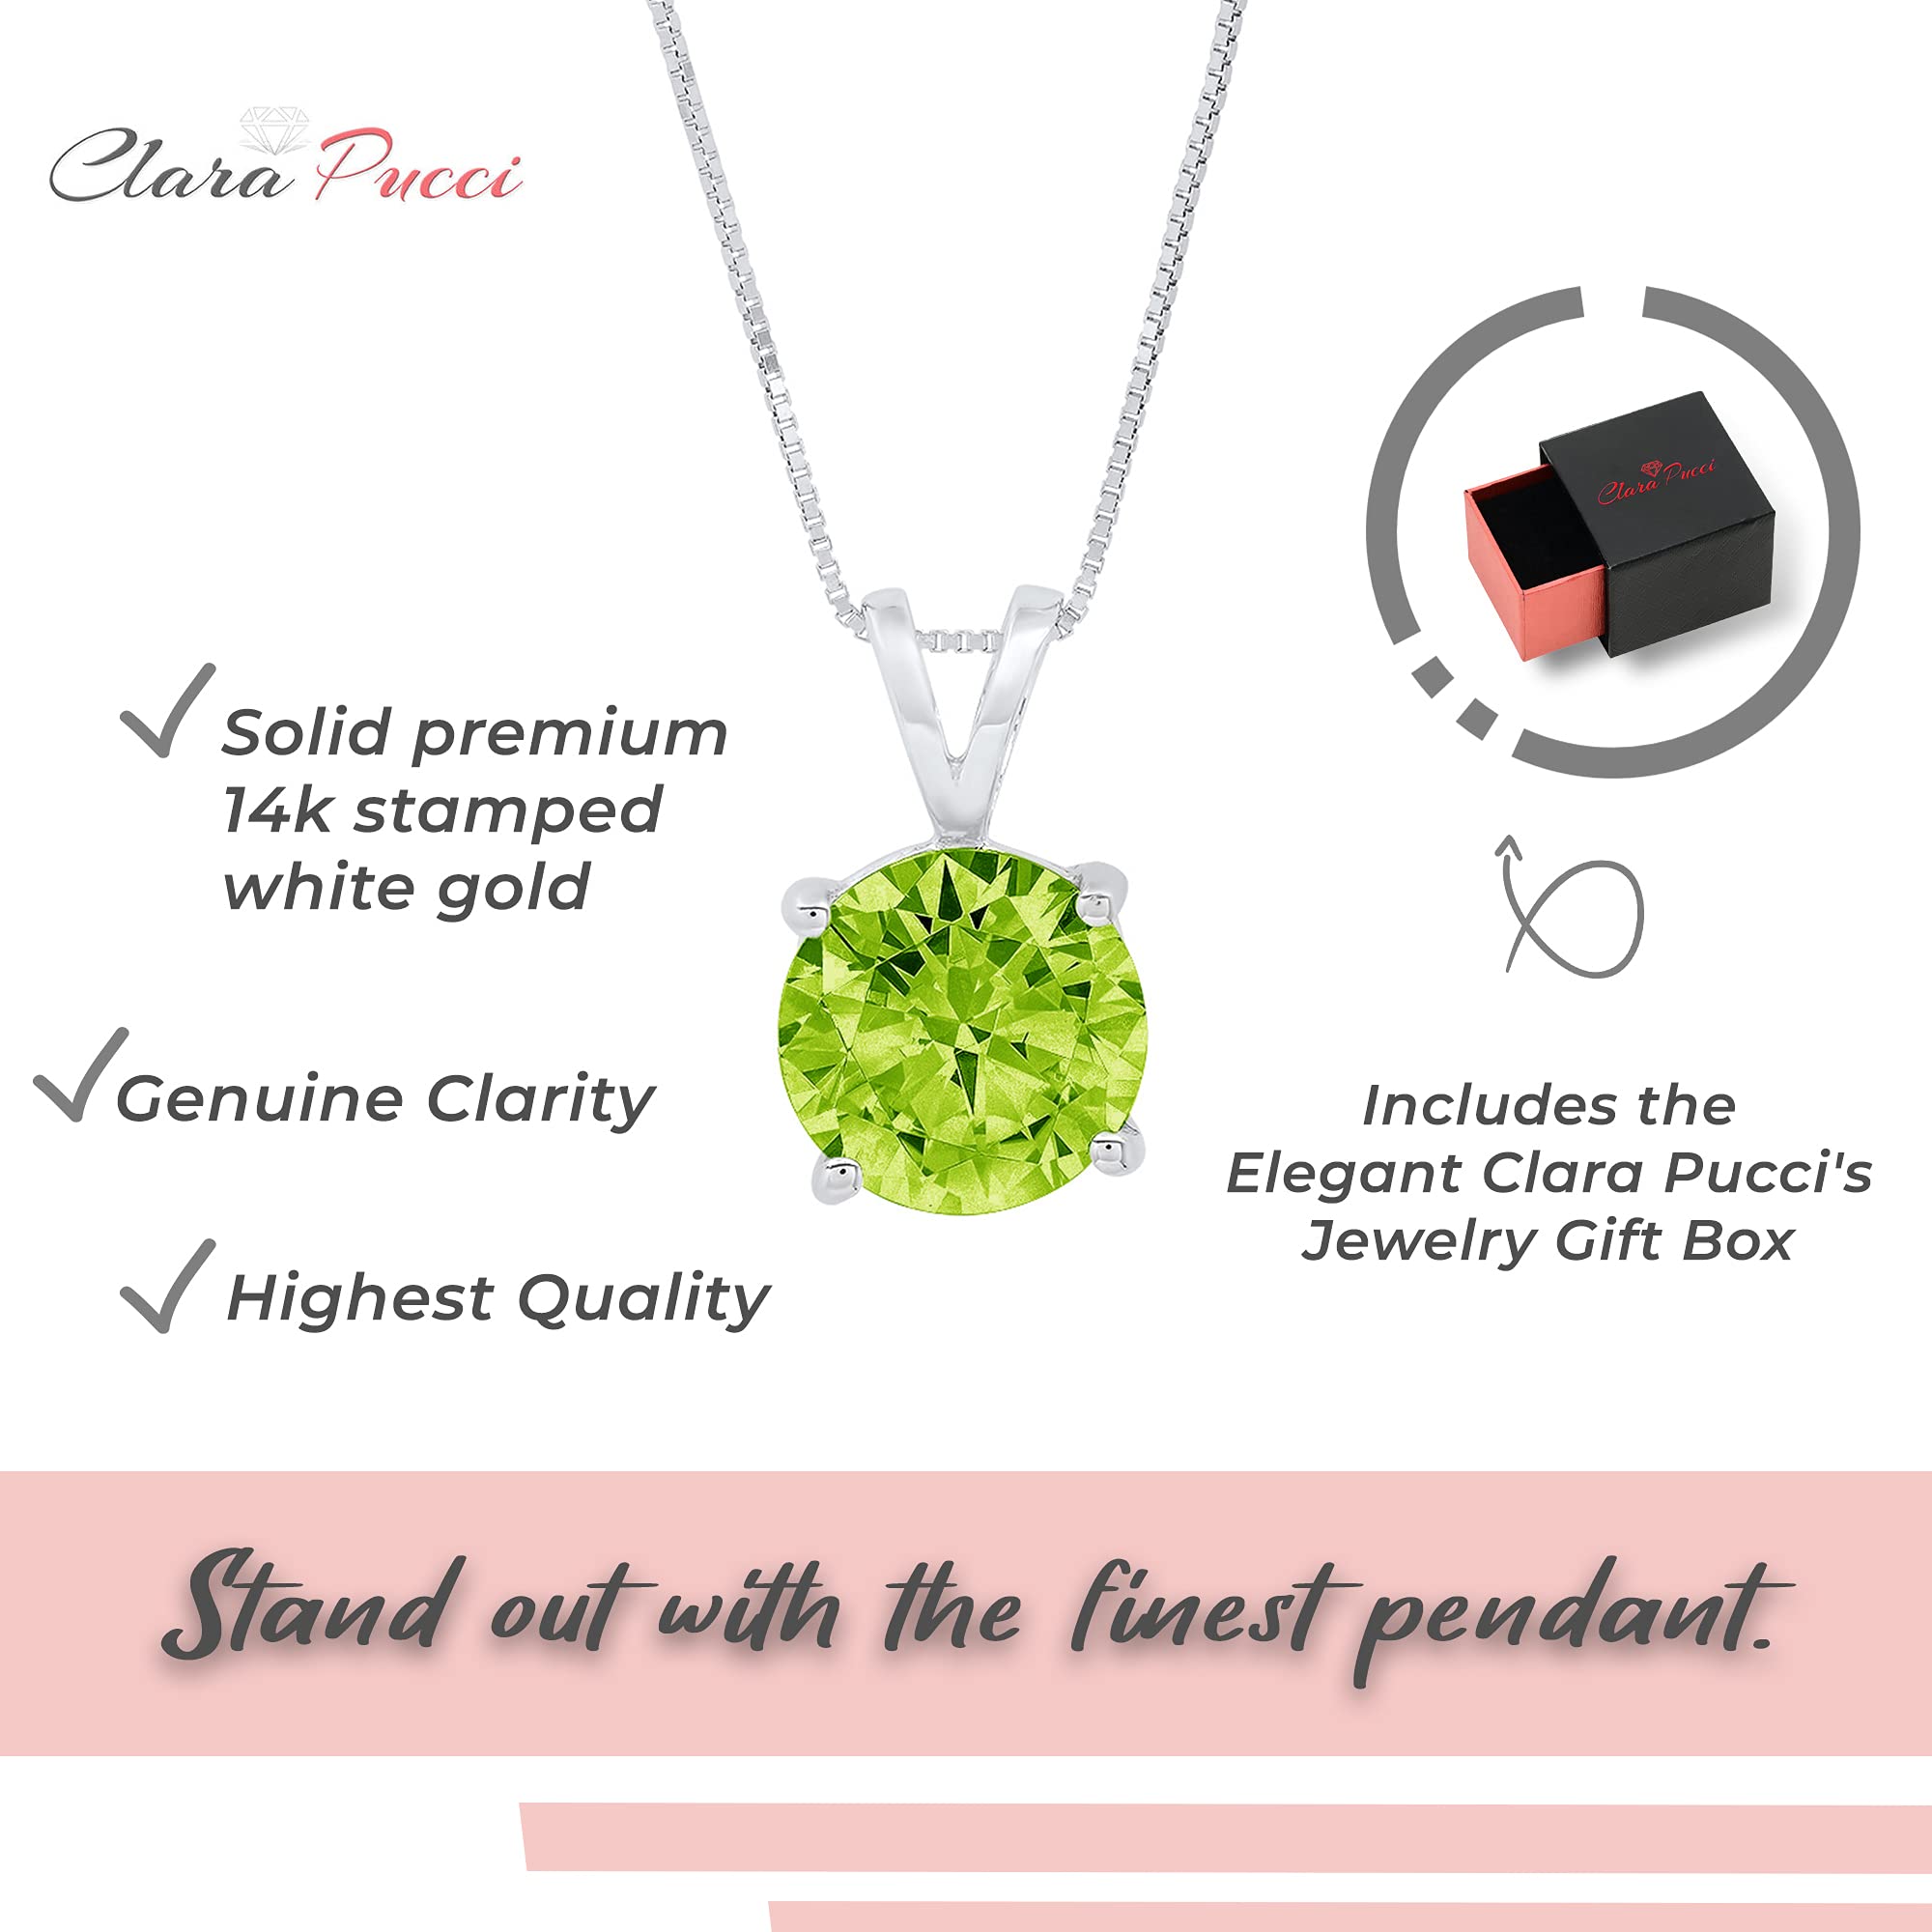 Clara Pucci 3.0 ct Brilliant Round Cut Designer Genuine Natural Green Peridot Jewelry VVS1 Solitaire Pendant August Birthstone Necklace for Women with 16